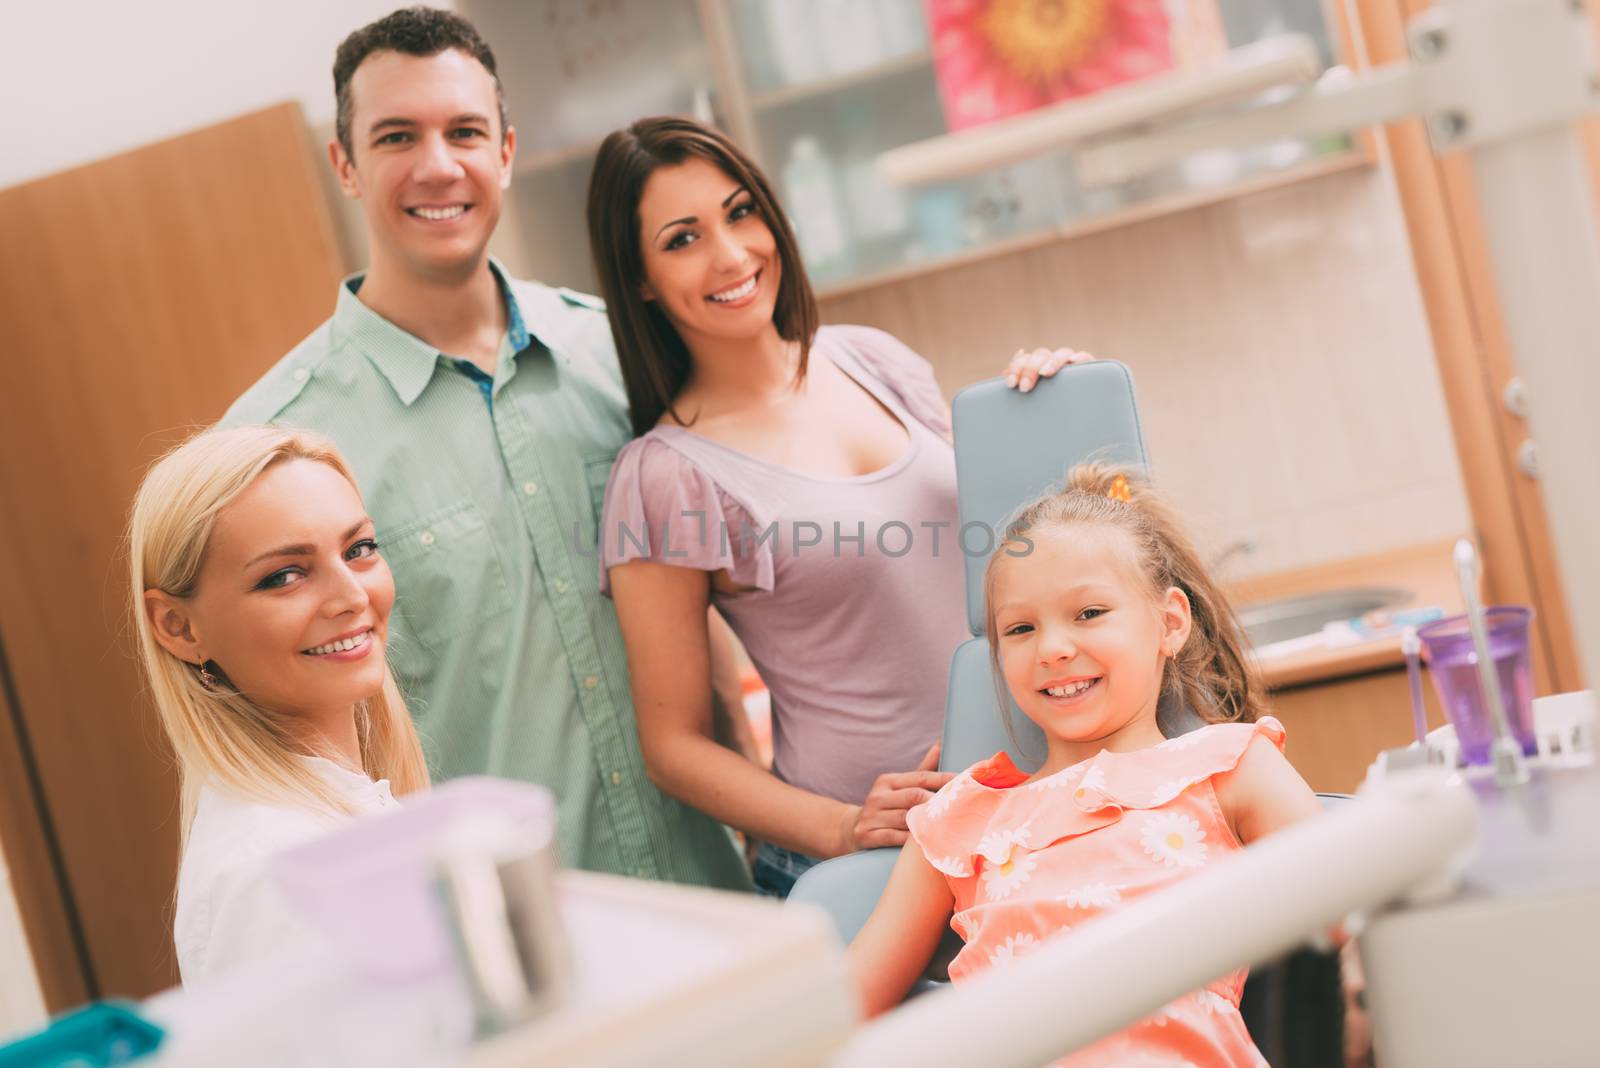 Family At The Dentist by MilanMarkovic78